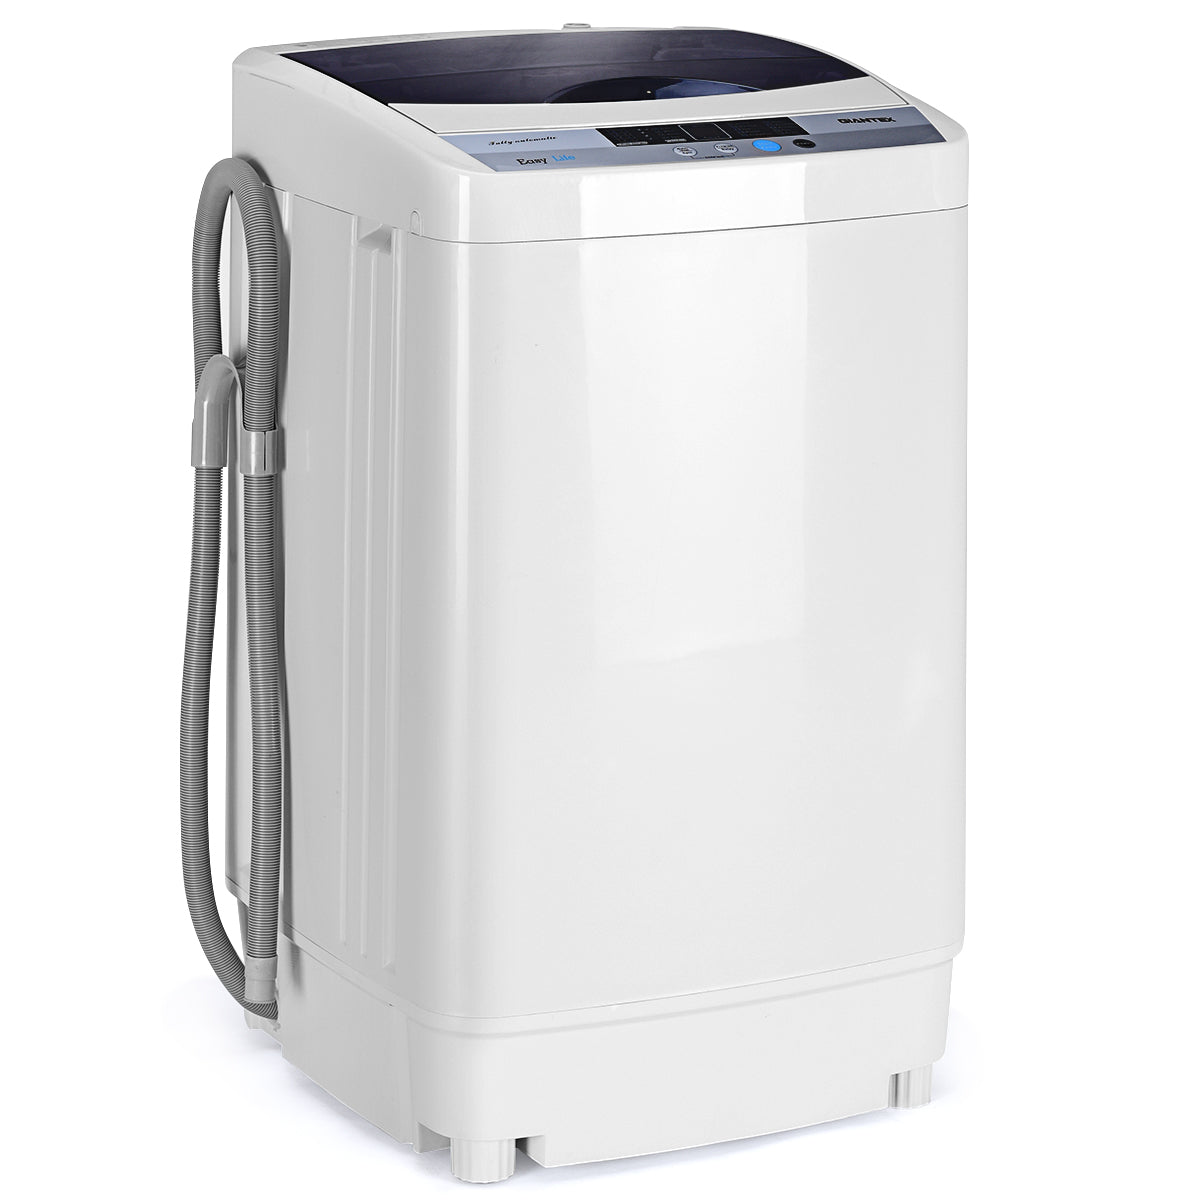 KUPPET Mini Portable Washing Machine for Compact Laundry, 7.7lbs Capacity,  Small Semi-Automatic Compact Washer with Timer Control Single Translucent